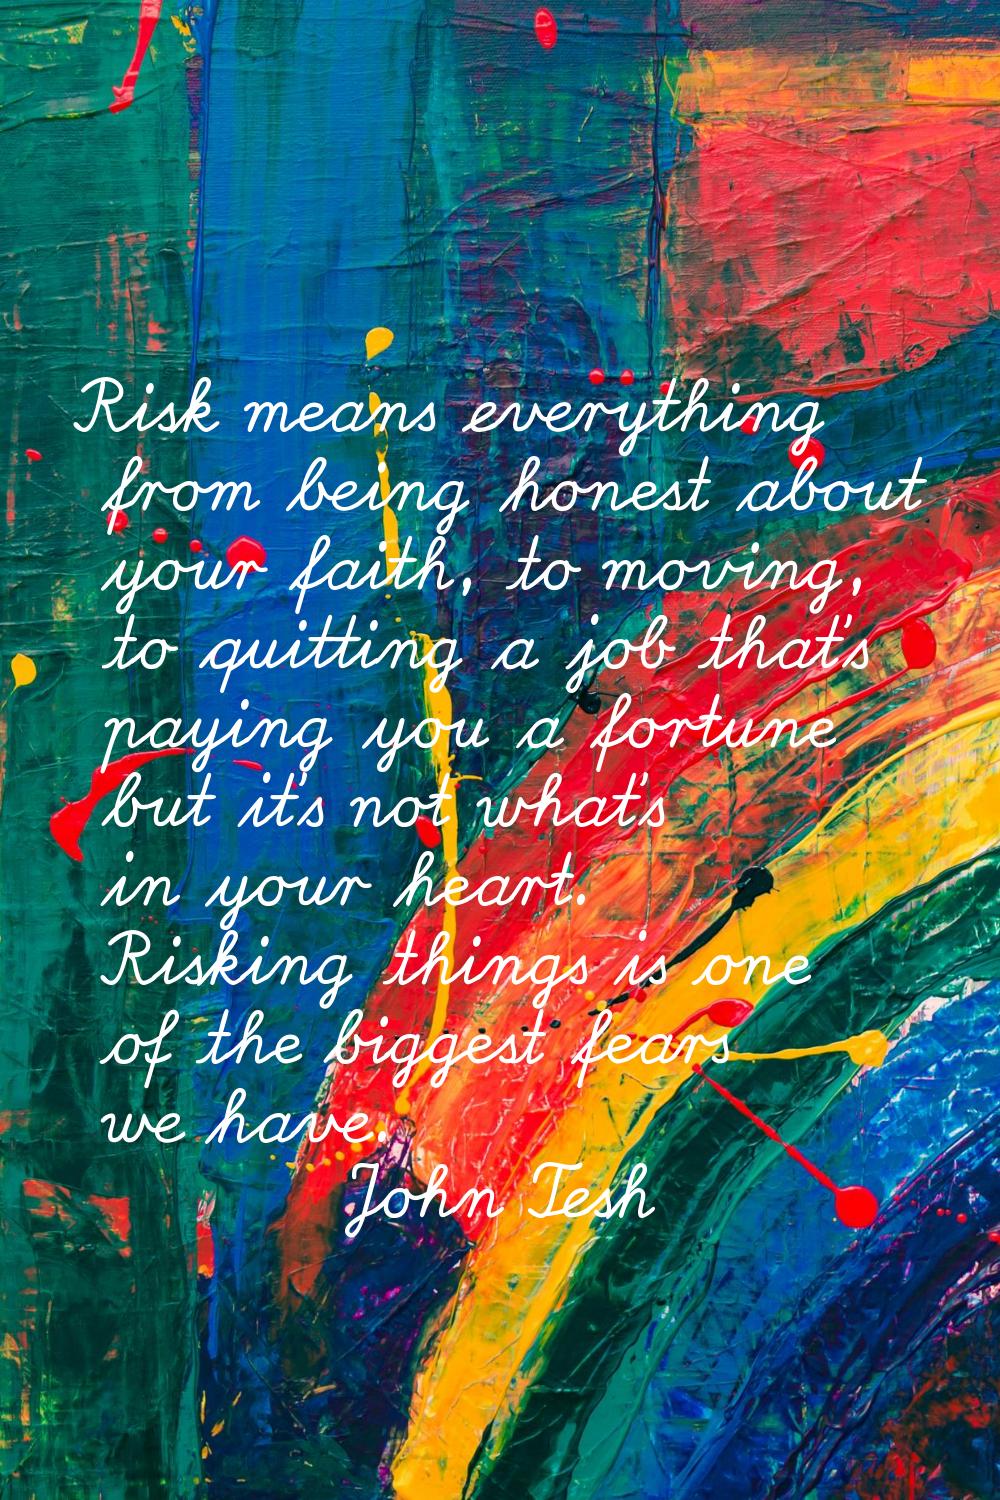 Risk means everything from being honest about your faith, to moving, to quitting a job that's payin